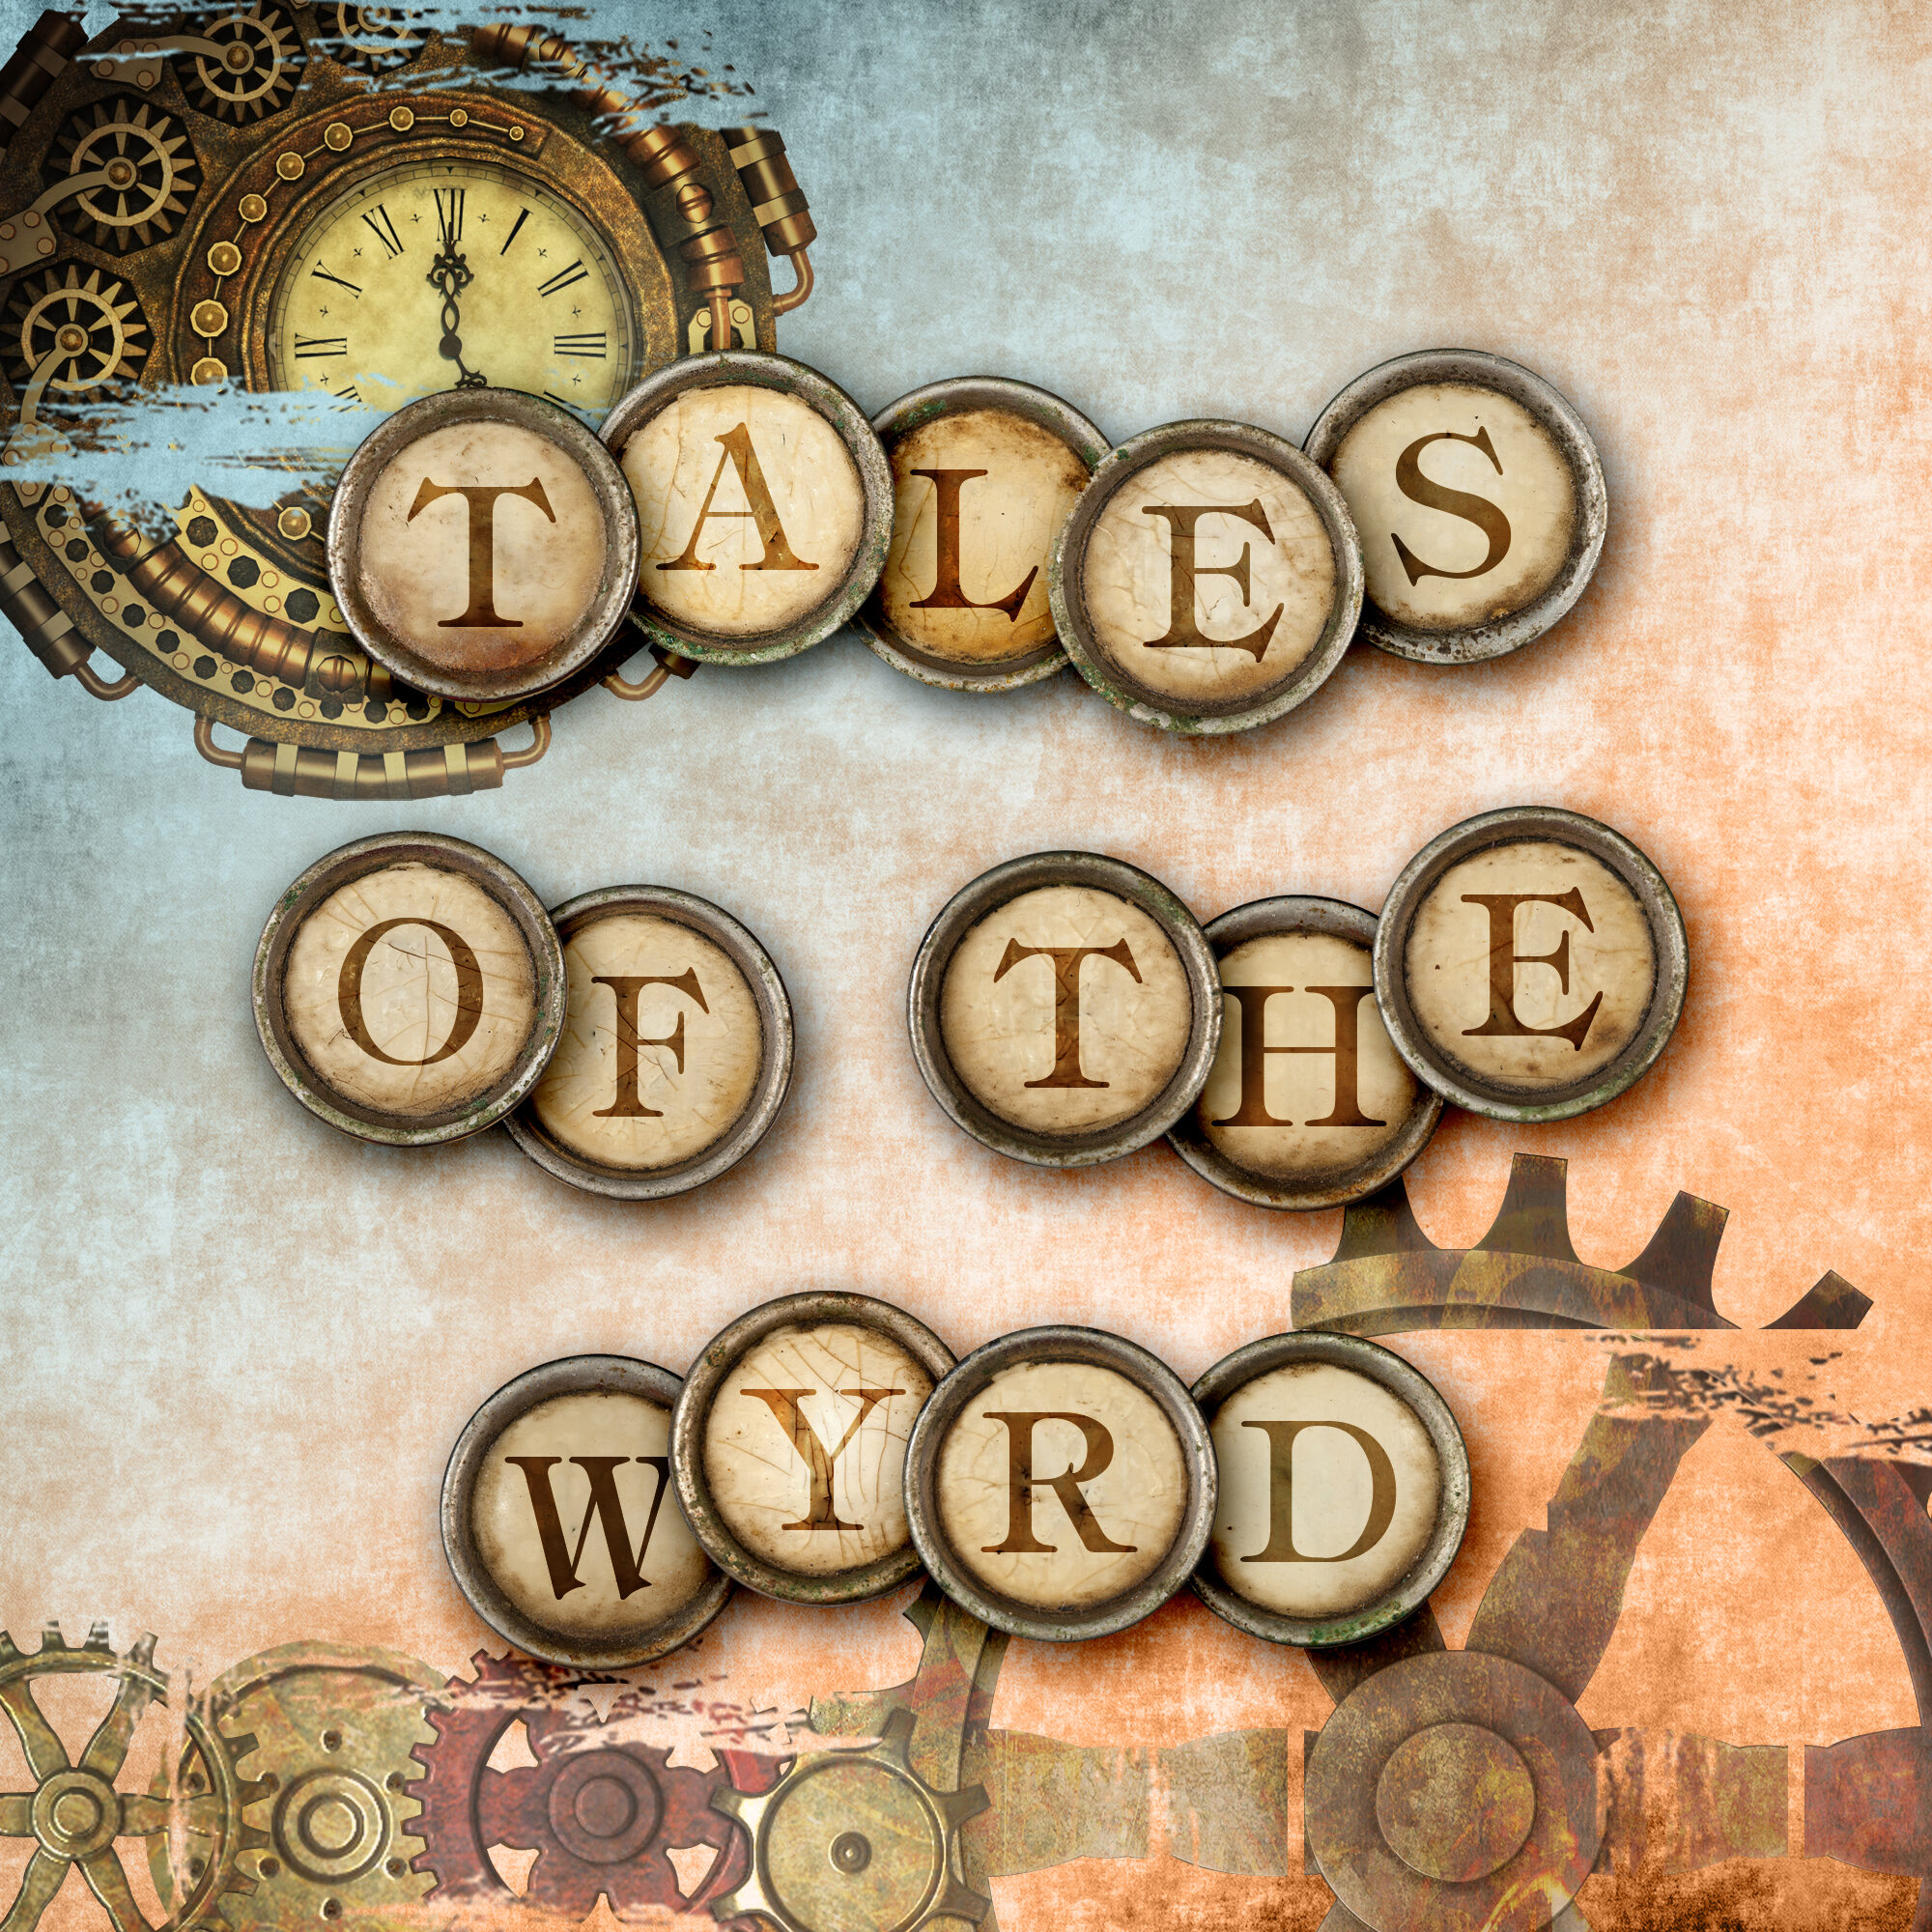 Tales of the Wyrd